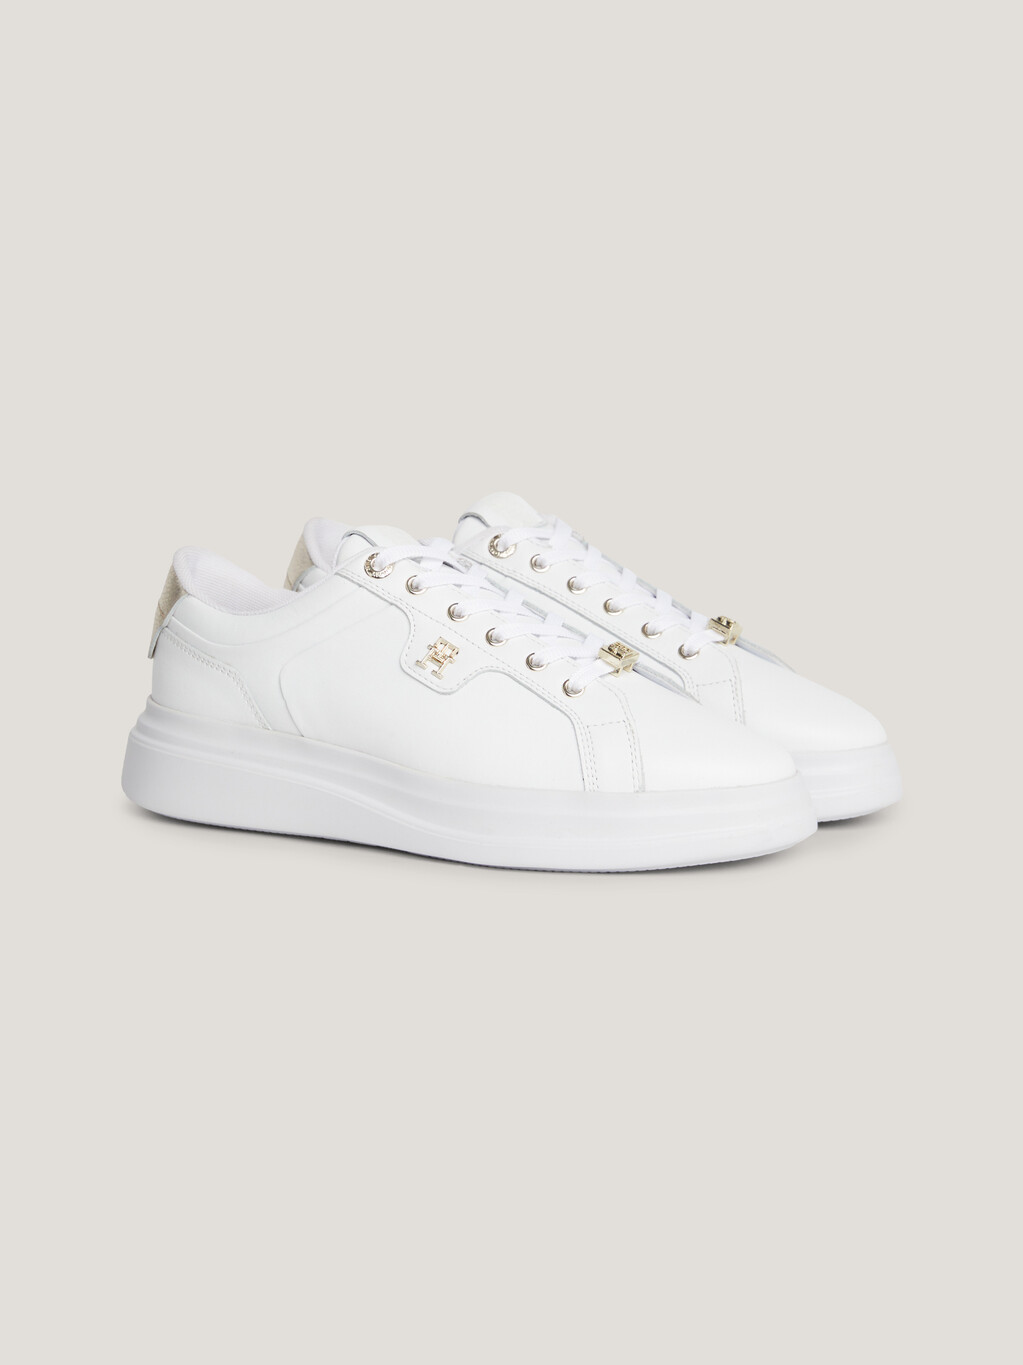 Leather TH Monogram Court Trainers, White/Gold, hi-res